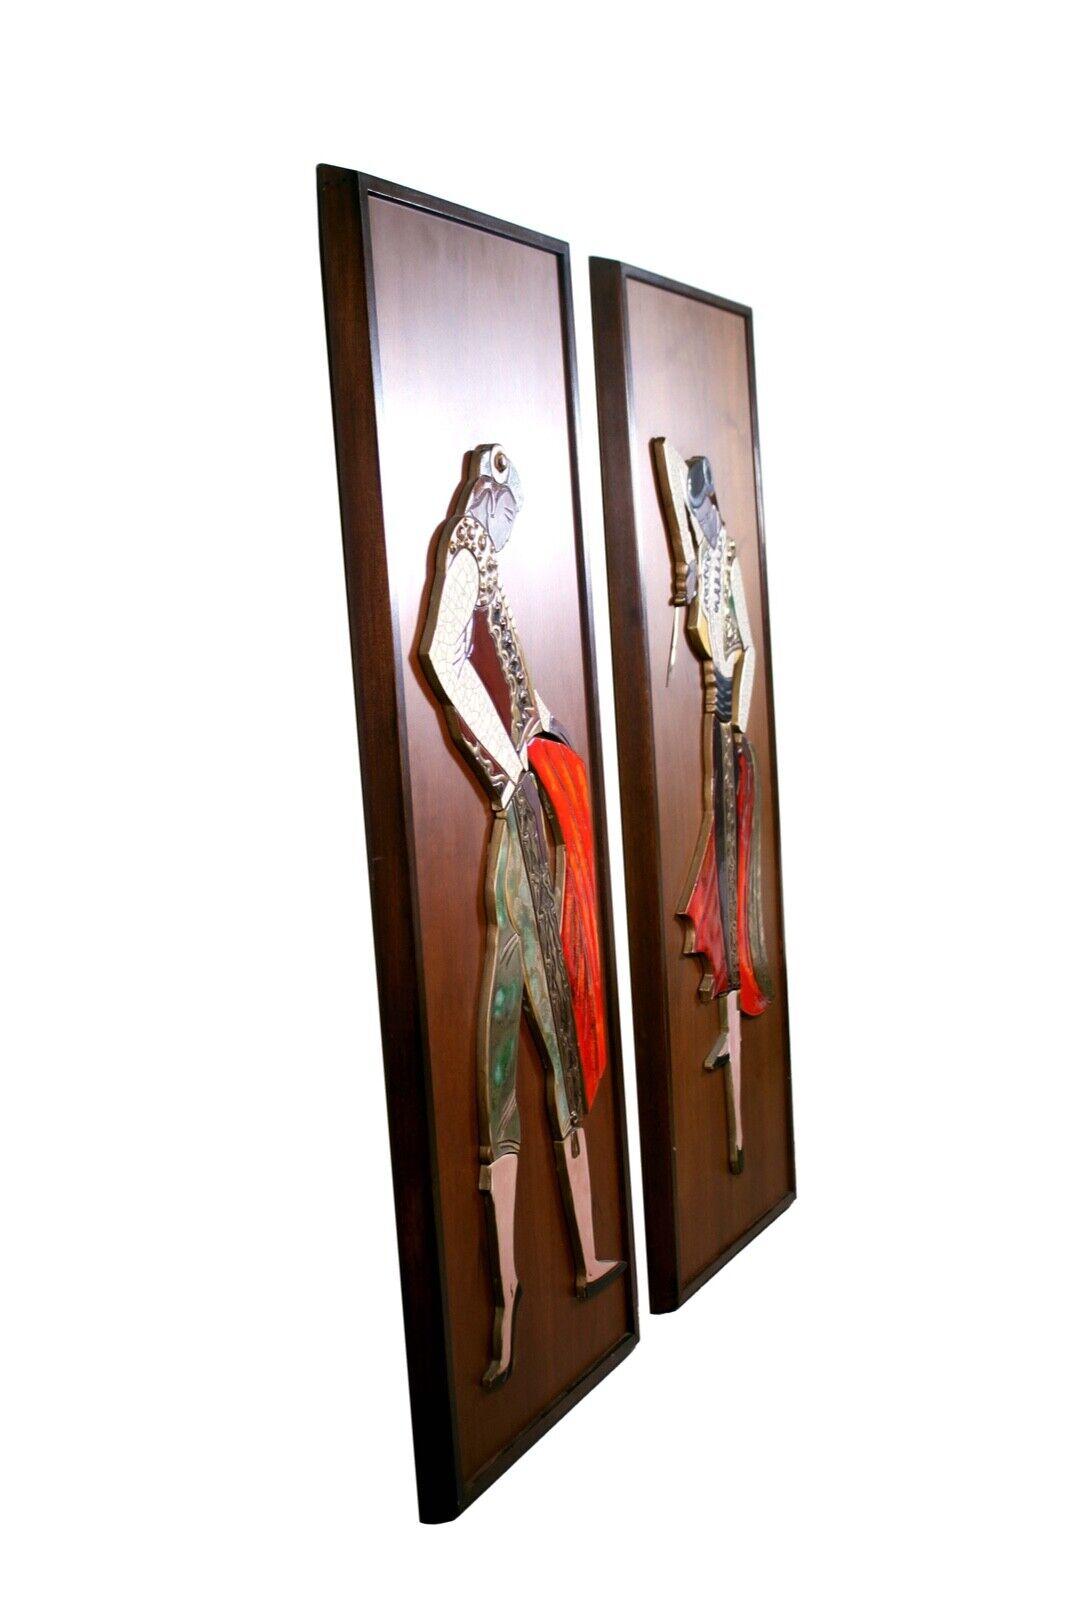 A rare and unique pair of inlaid ceramic wall hanging sculptures depicting dynamic matadors by Irina Lorin. Signed 